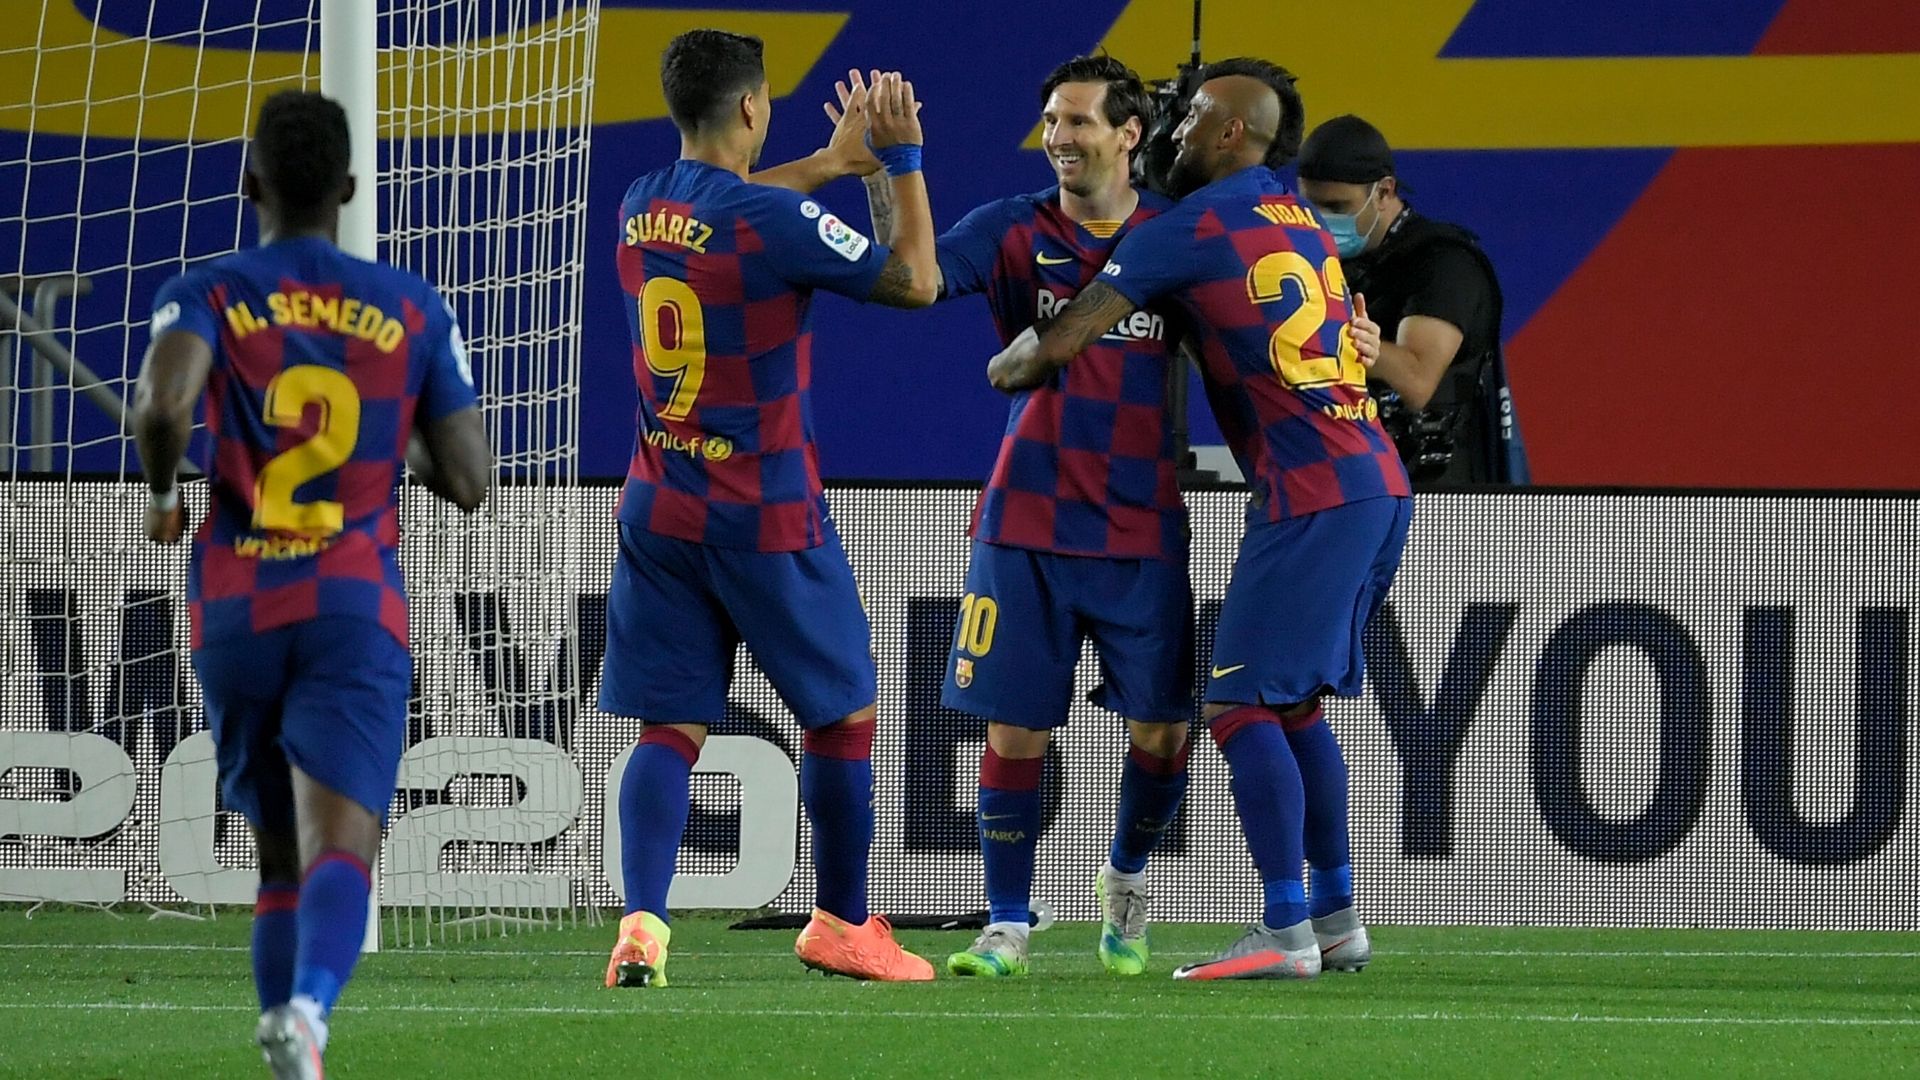 Barcelona 2-0 Leganes: Messi on target in hard-fought win for leaders